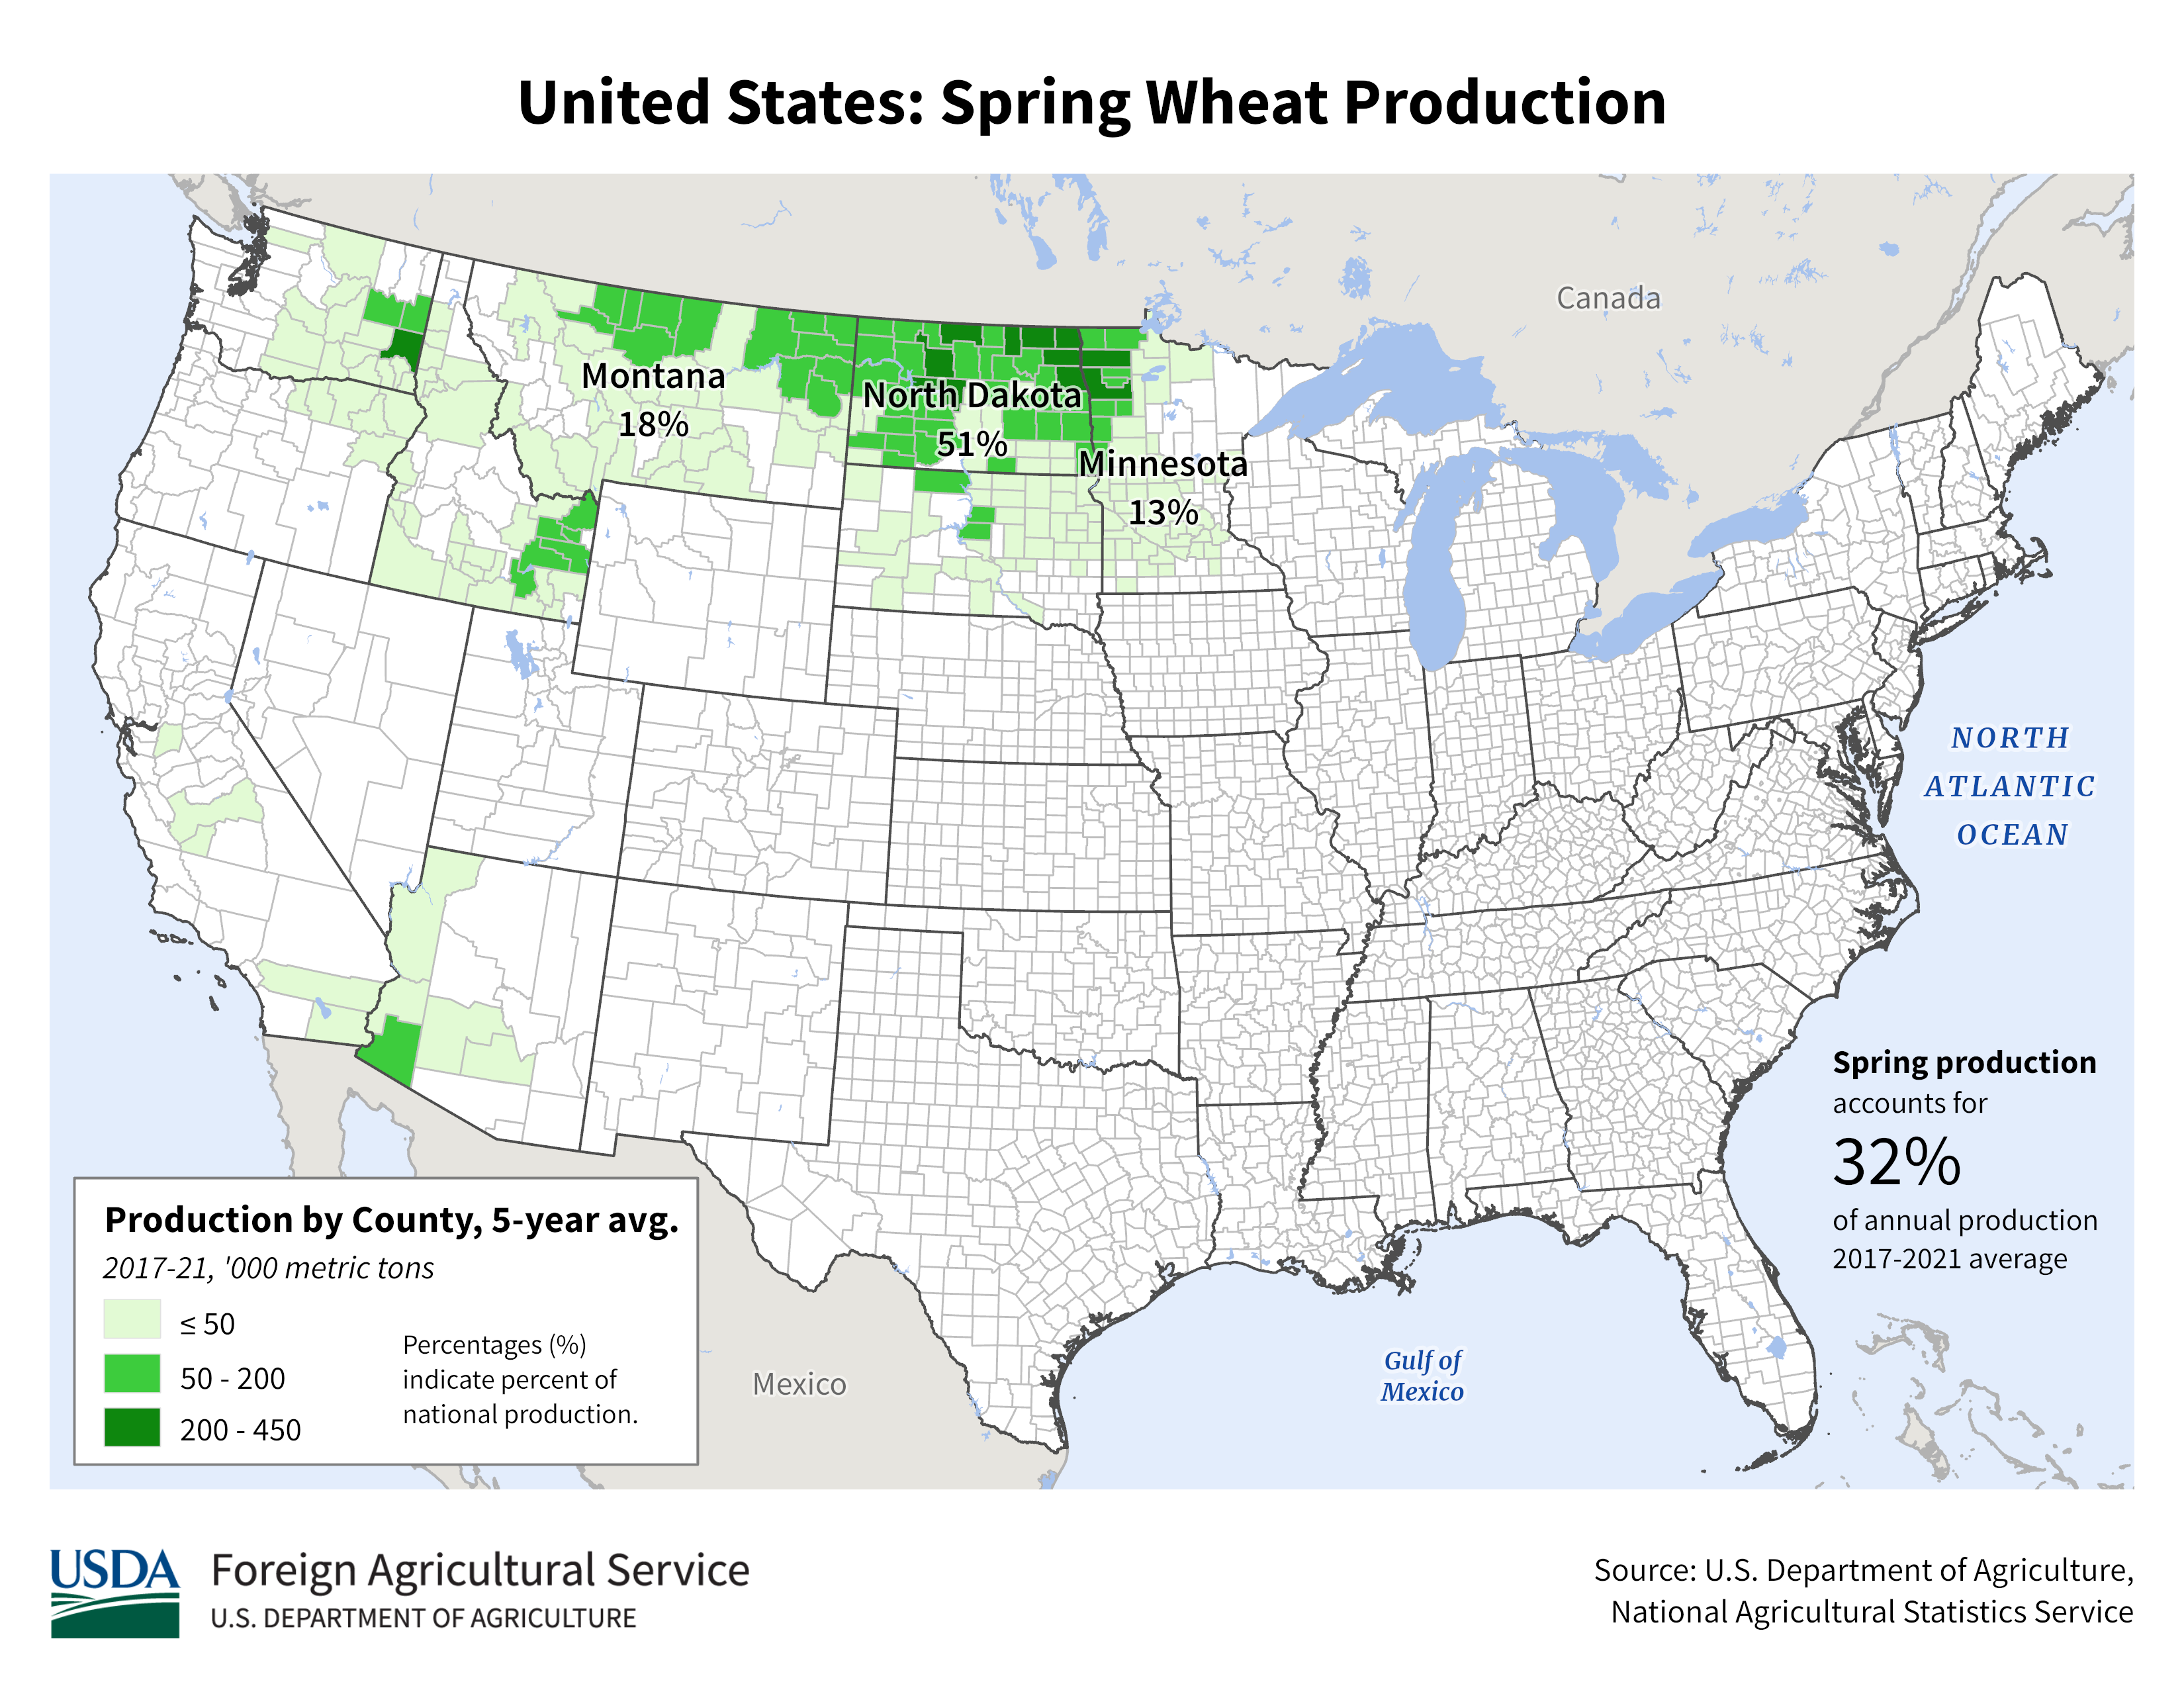 https://ipad.fas.usda.gov/rssiws/al/crop_production_maps/US/USA_Spring_Wheat.png